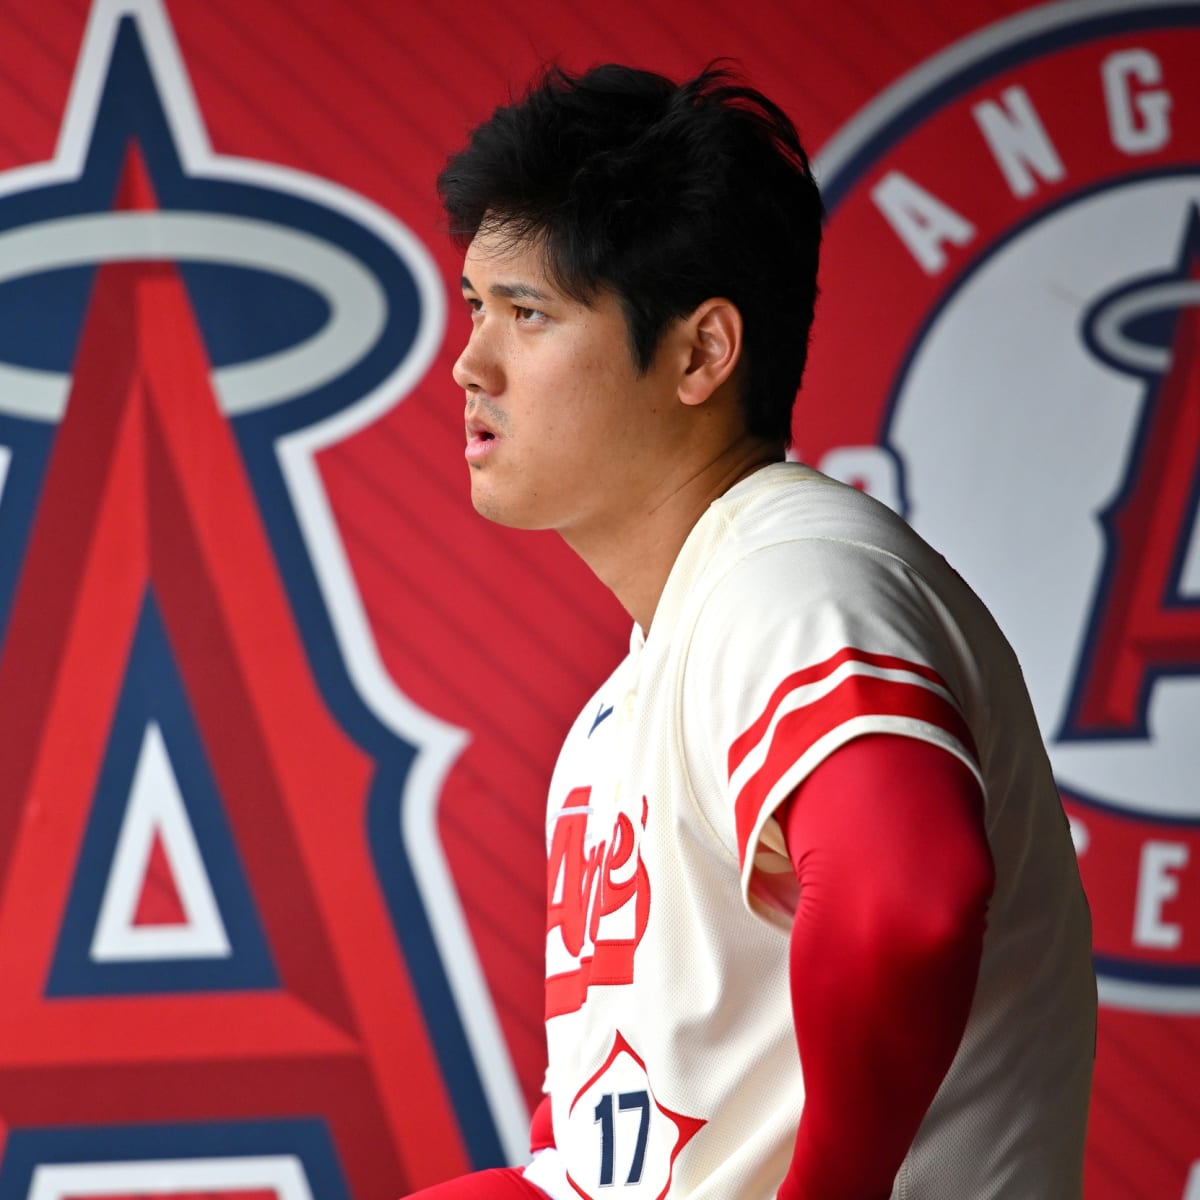 Shohei Ohtani Game Used Alternate Red Jersey from 1st 2 Homerun Game